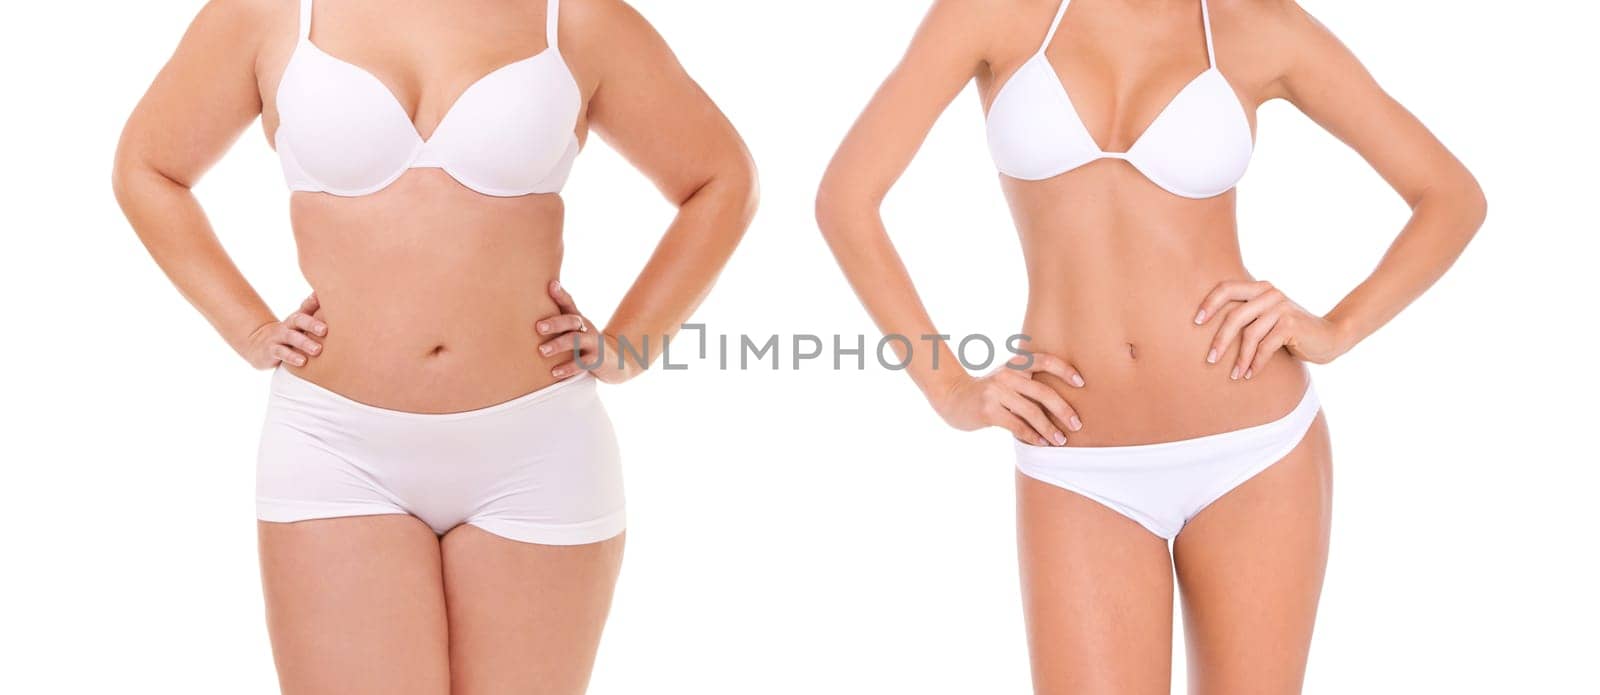 Transformation, lose weight and stomach of woman on a white background for diet, detox and wellness. Health, before after and isolated person in underwear for workout, exercise and fitness in studio.